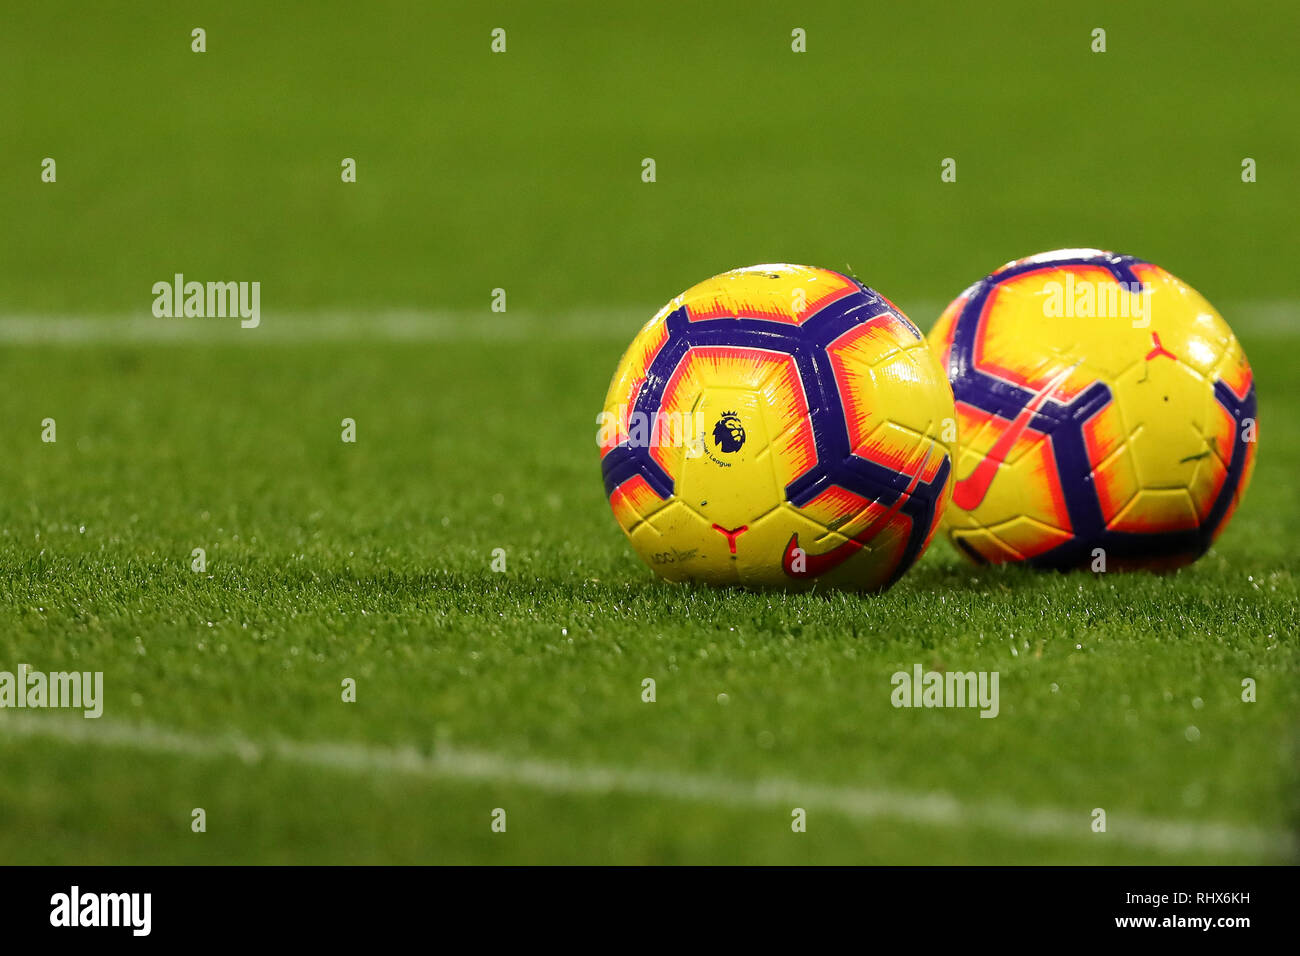 Nike Premier League Football 2018 2019 High Resolution Stock Photography  and Images - Alamy